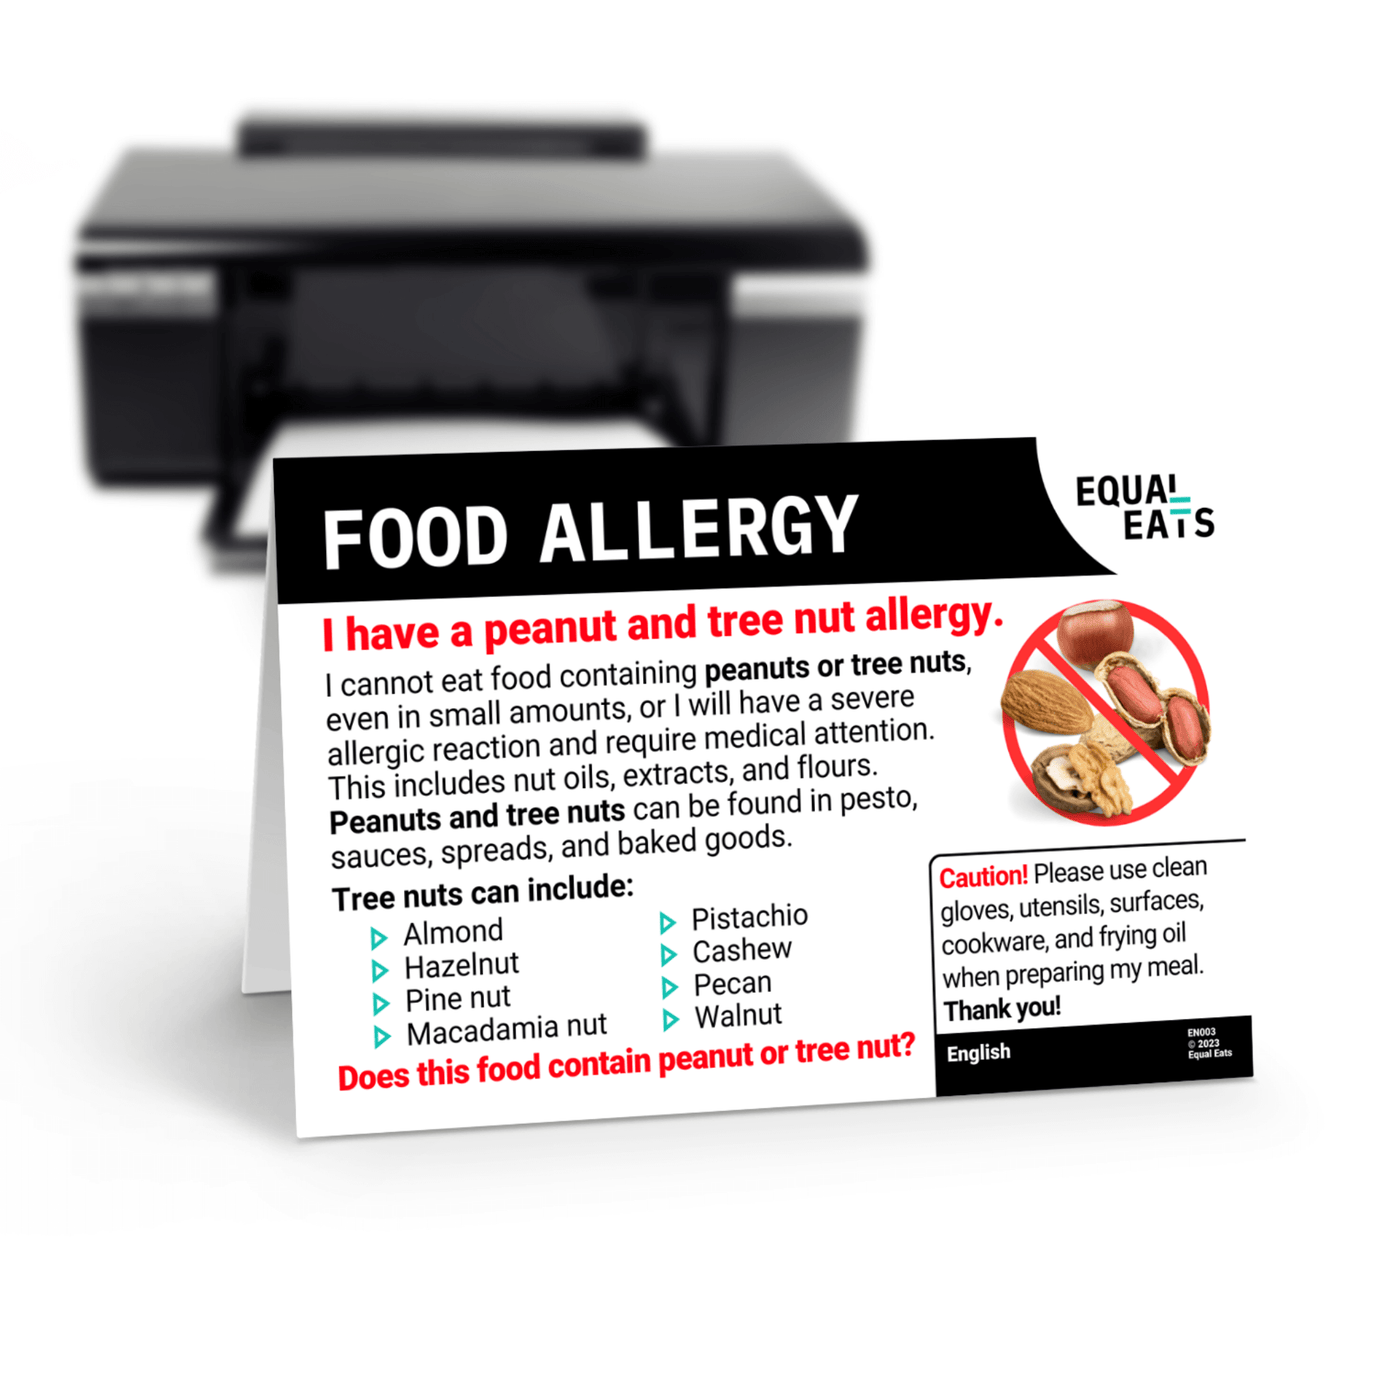 Printable Peanut and Tree Nut Allergy Card in English